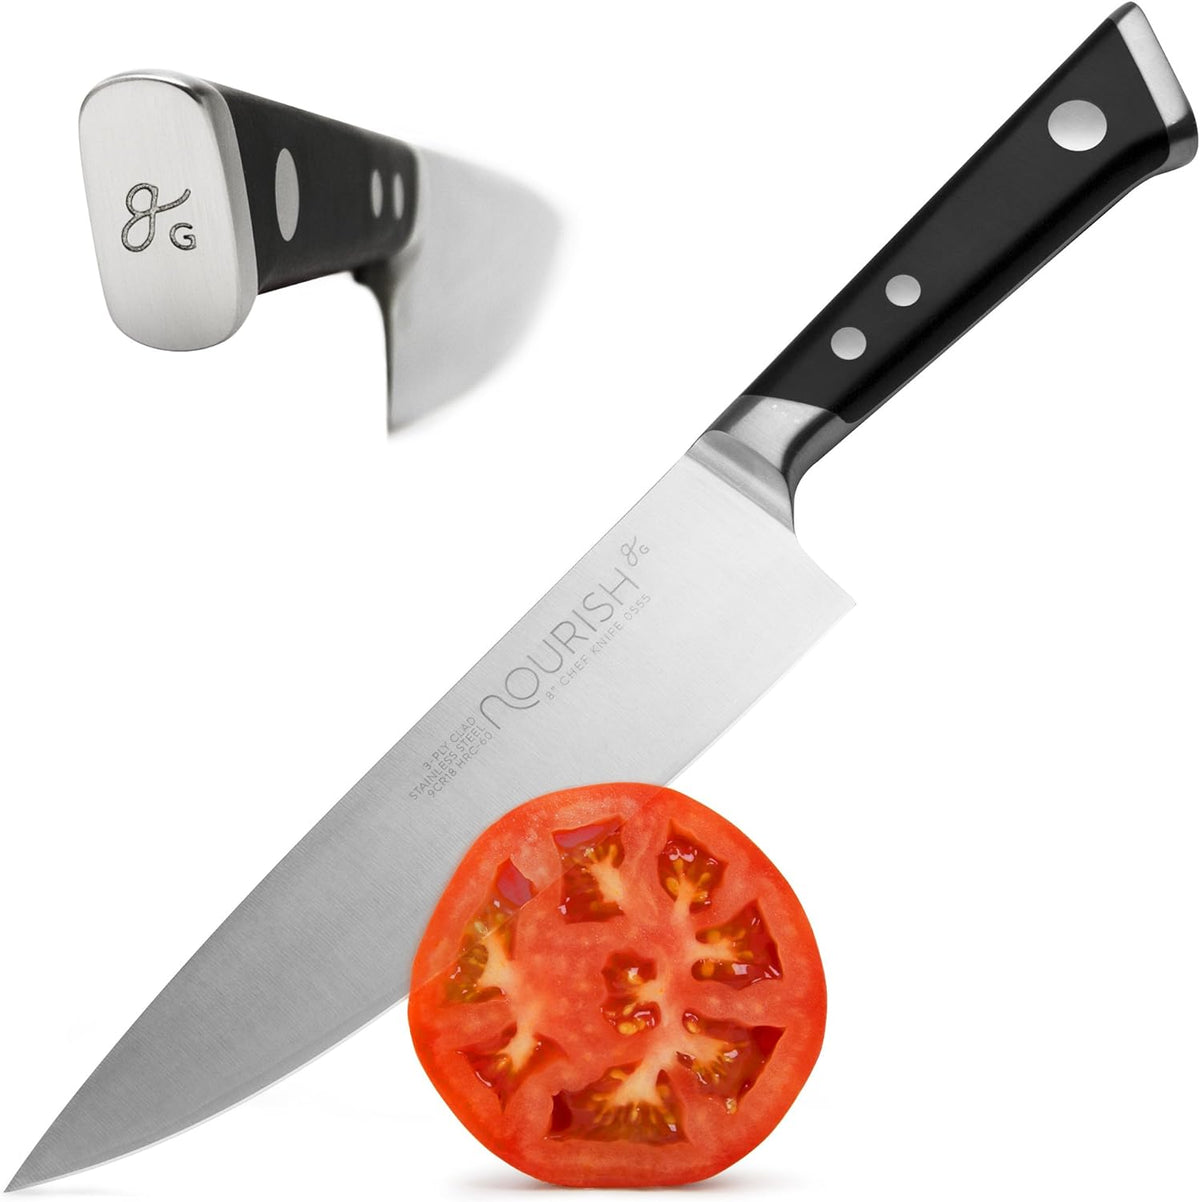 Greater Goods Kitchen Scale and Chef’s Knife Bundle